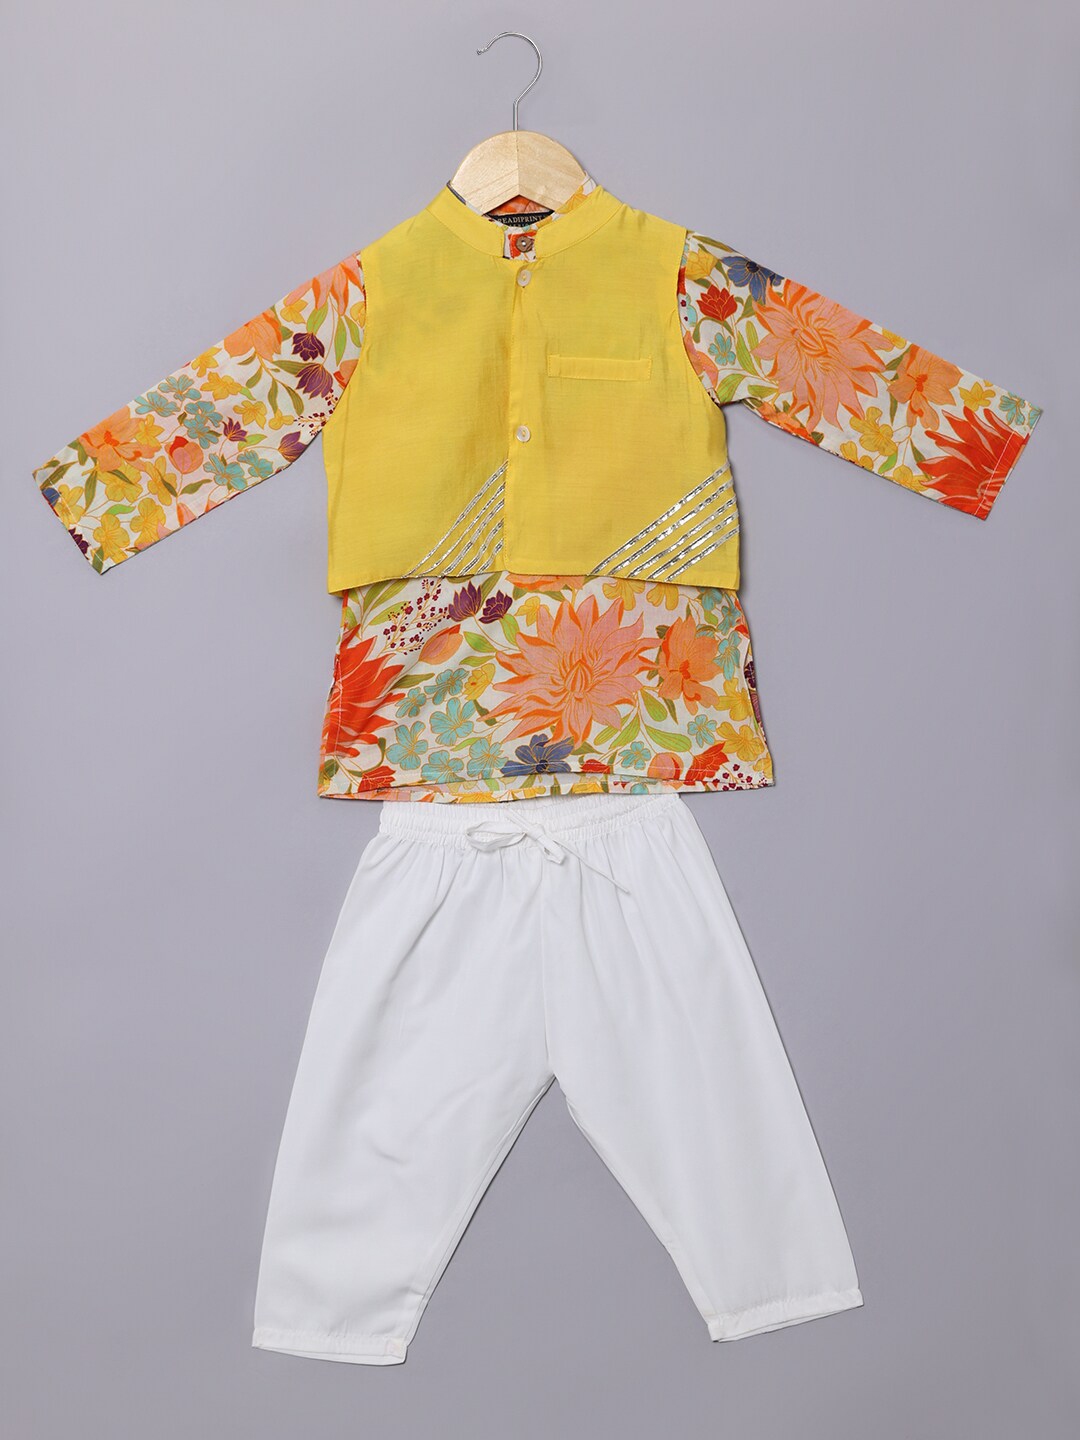 Floral printed nehru jacket with white kurta and pyjama - set of 3 by The  Weave Story